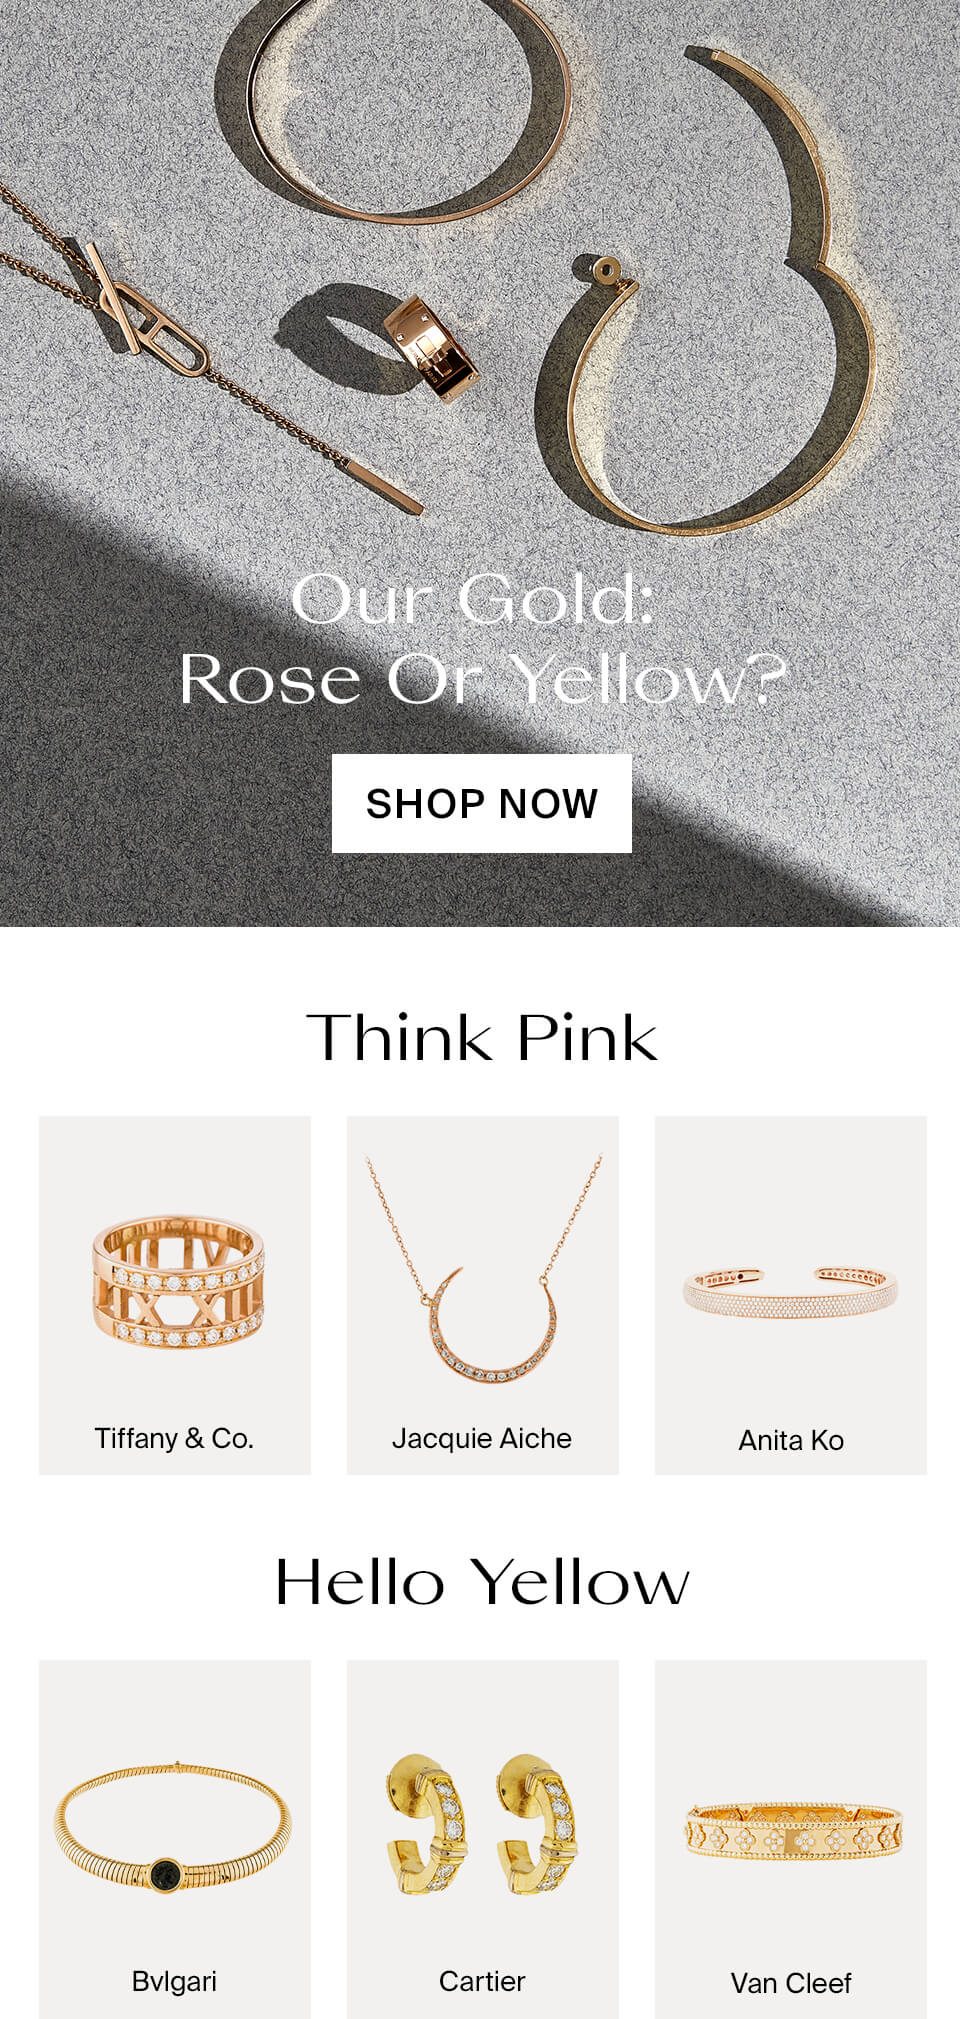 Your Gold: Rose or Yellow?